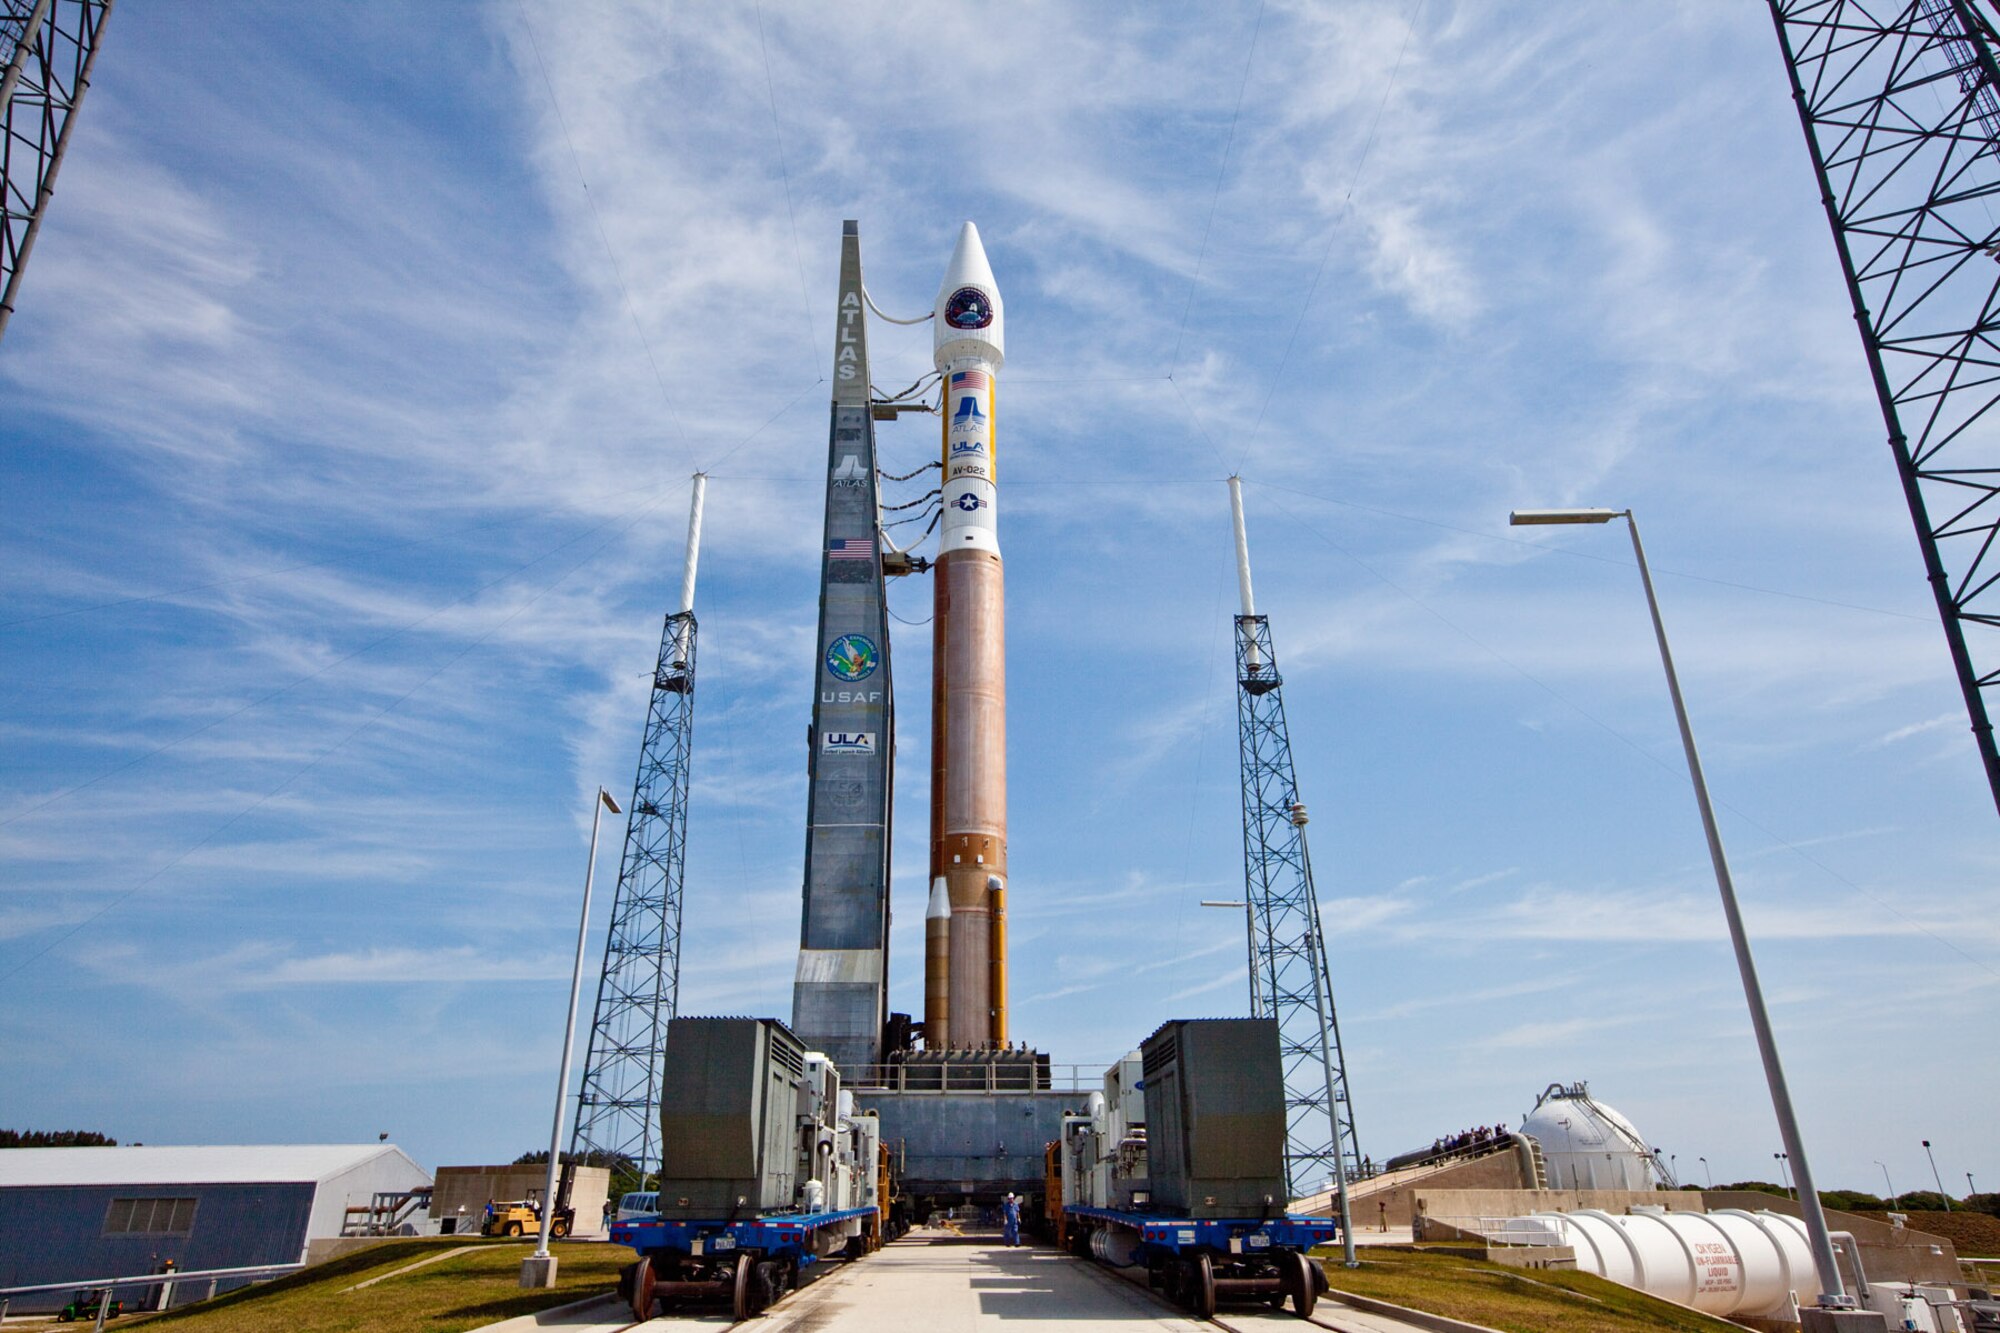 Cape Canaveral AFS, Fla. (May 5, 2011) -  A United Launch Alliance Atlas V rocket with the Air Force's Space Based Infrared Systems (SBIRS) spacecraft rolls out to its Space Launch Complex-41 launch pad arriving at 11 a.m. EDT today.  SBIRS is designed to provide global, persistent, infrared surveillance capability to meet 21st century demands in mission areas including missile warning, missile defense, technical intelligence and battlespace awareness. The launch of the SBIRS mission is set for Friday, May 6 with the launch period opening at 2:14 p.m. EDT. (Courtesy  Photo by Pat Corkery, United Launch Alliance.)